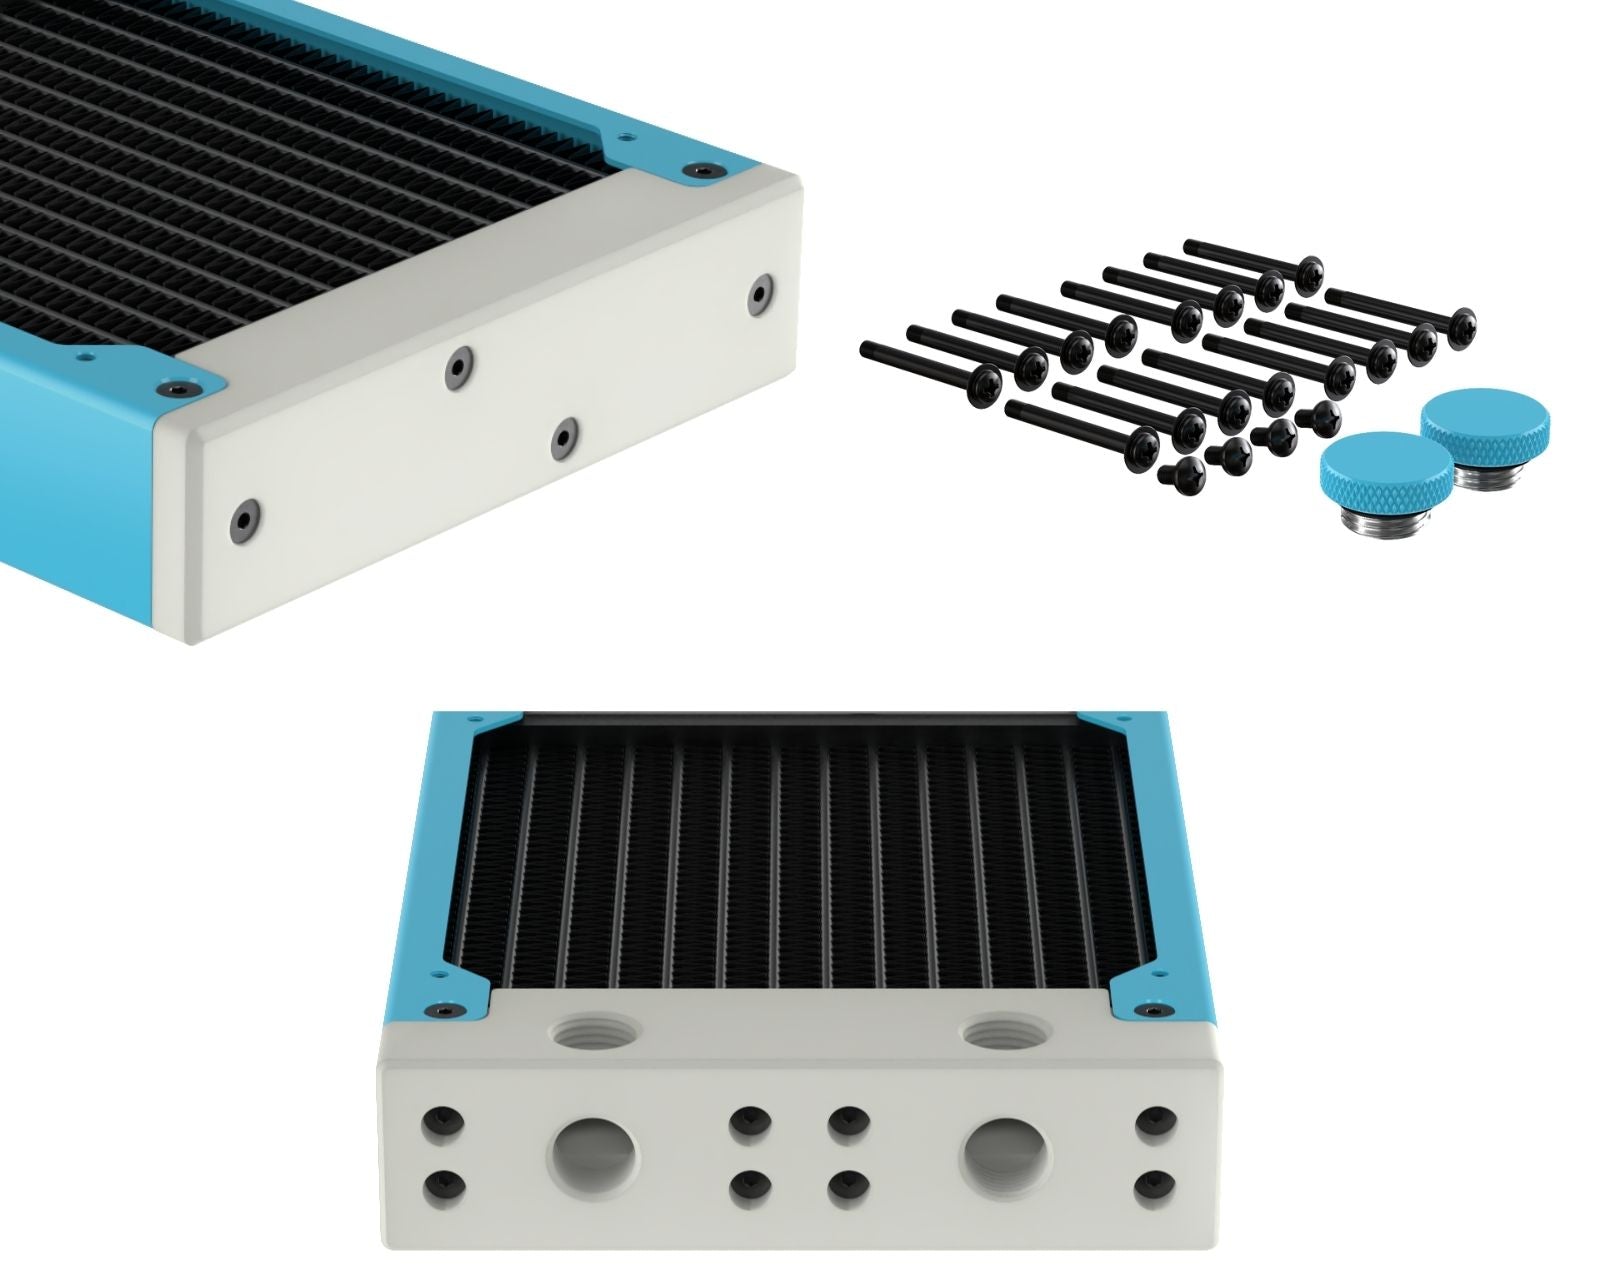 PrimoChill 480SL (30mm) EXIMO Modular Radiator, White POM, 4x120mm, Quad Fan (R-SL-W48) Available in 20+ Colors, Assembled in USA and Custom Watercooling Loop Ready - Sky Blue